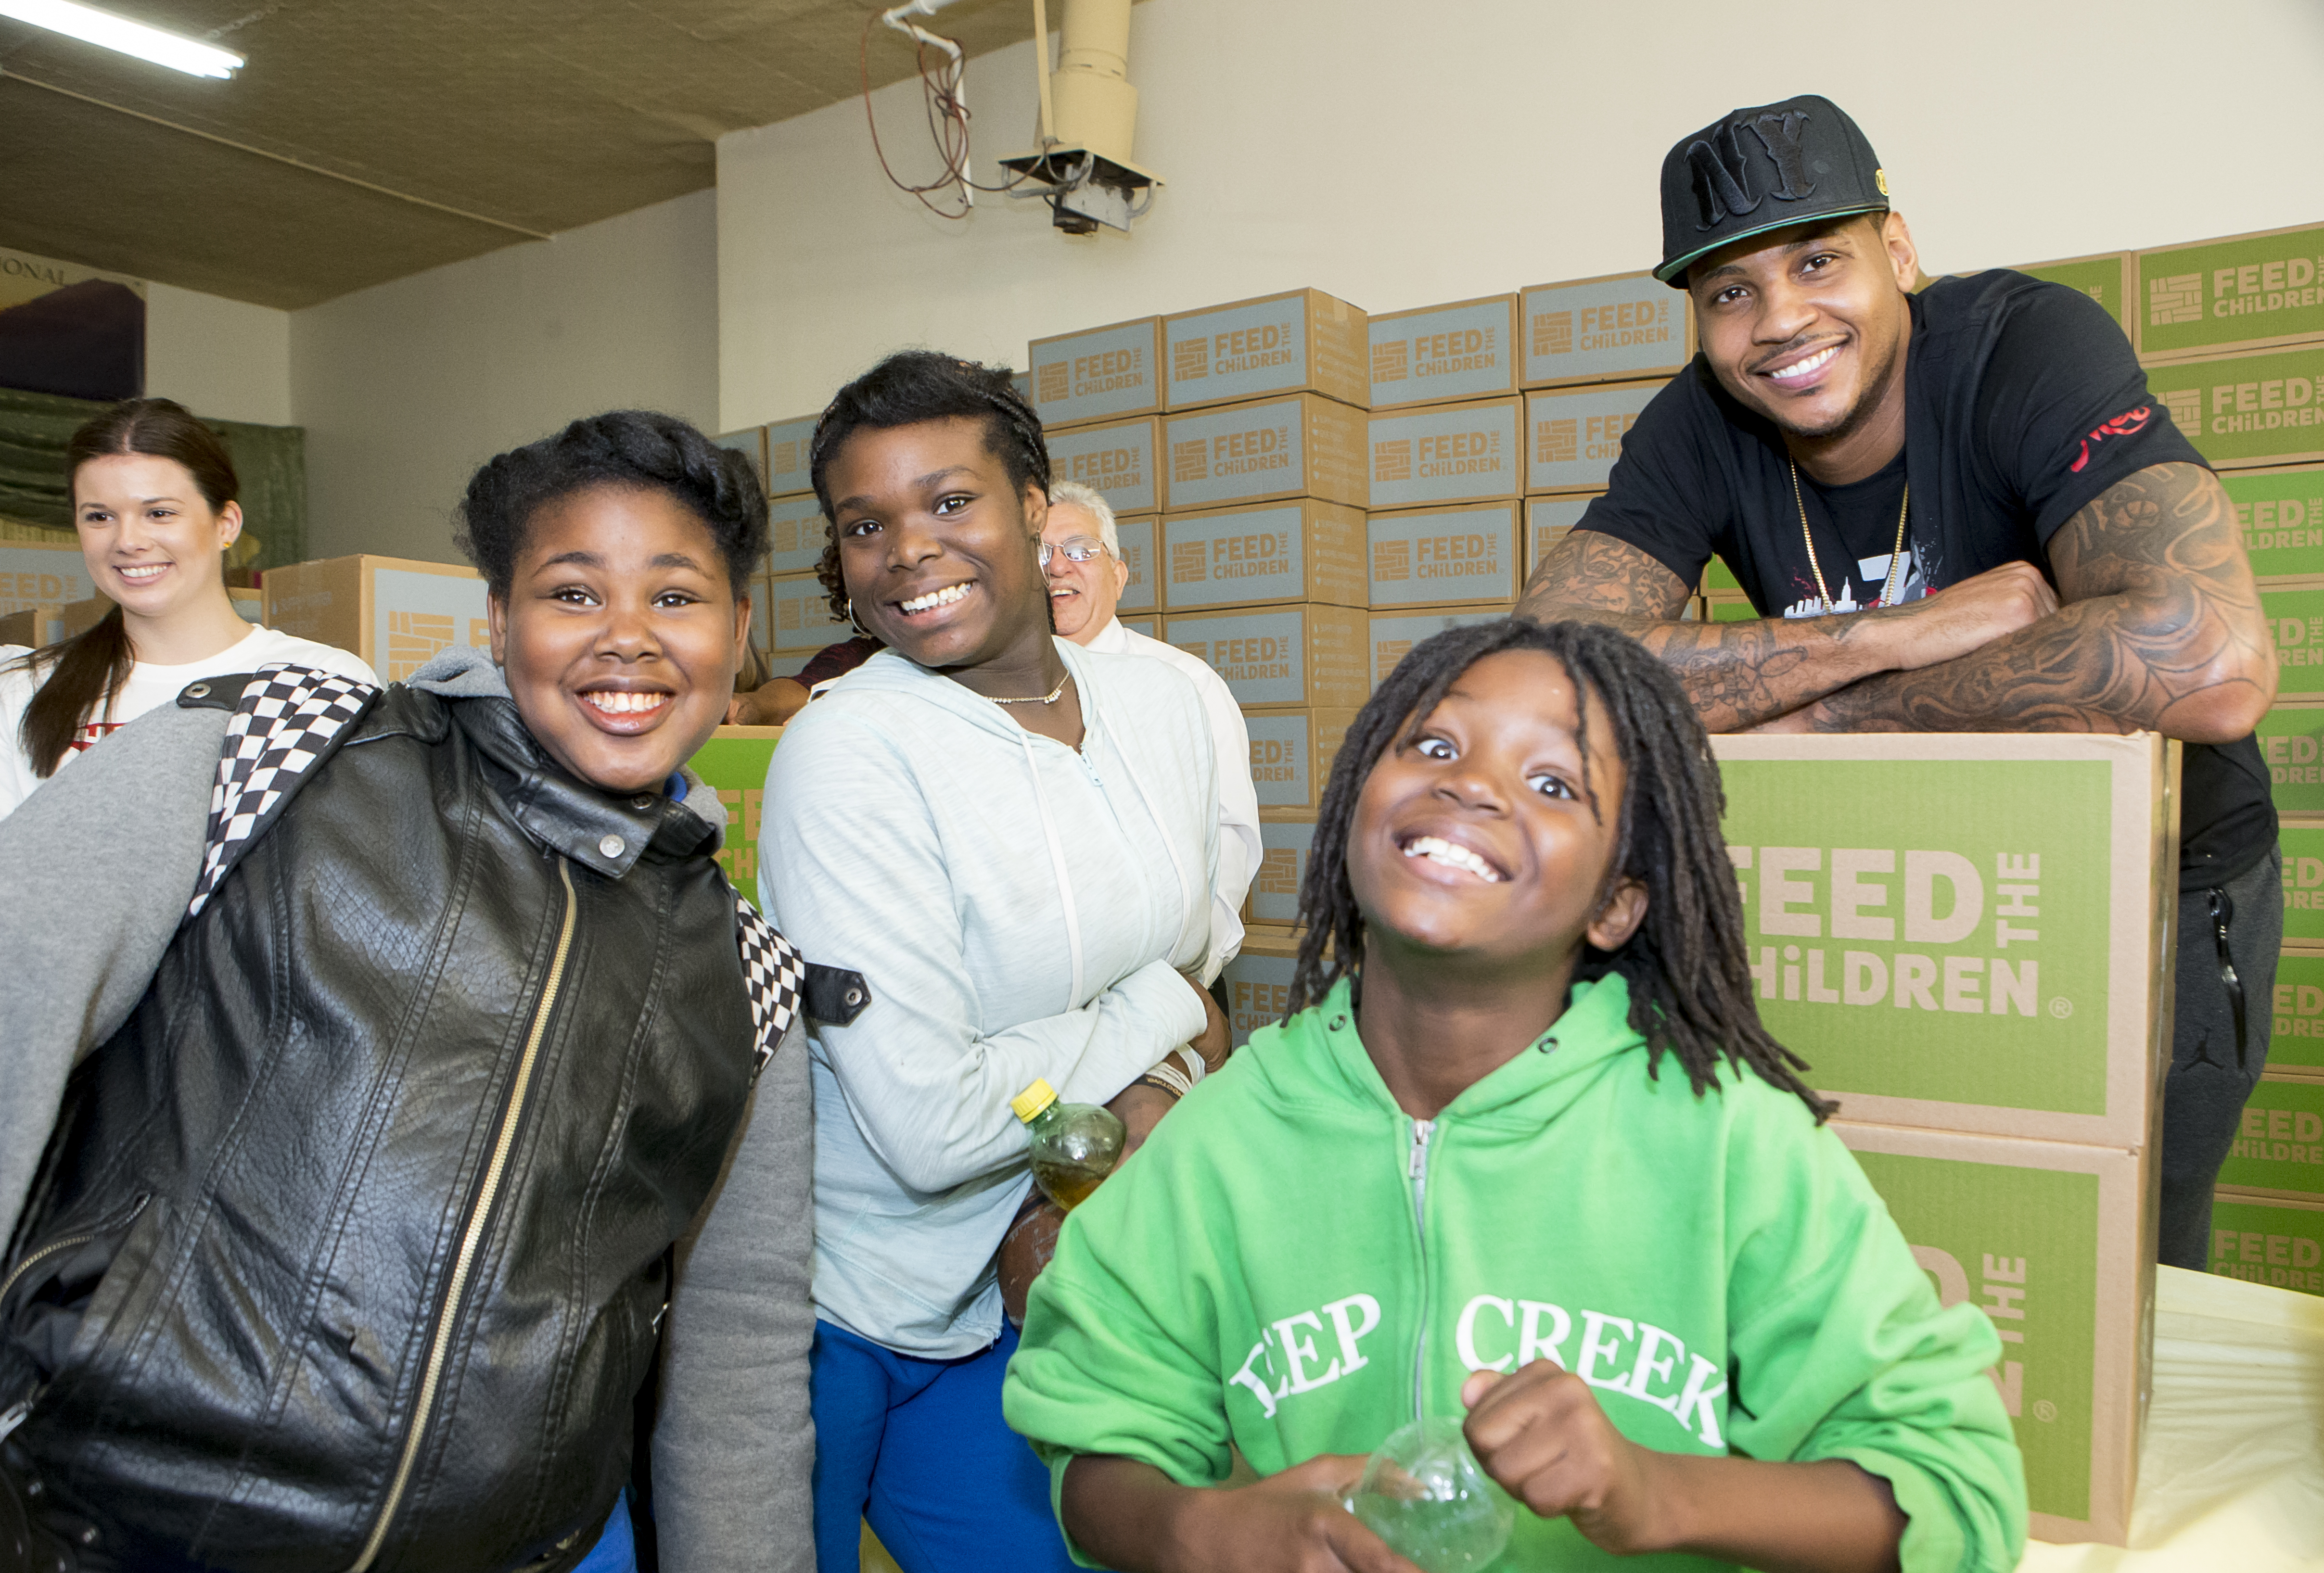 Carmelo Anthony's Foundation Feeds Those in Need